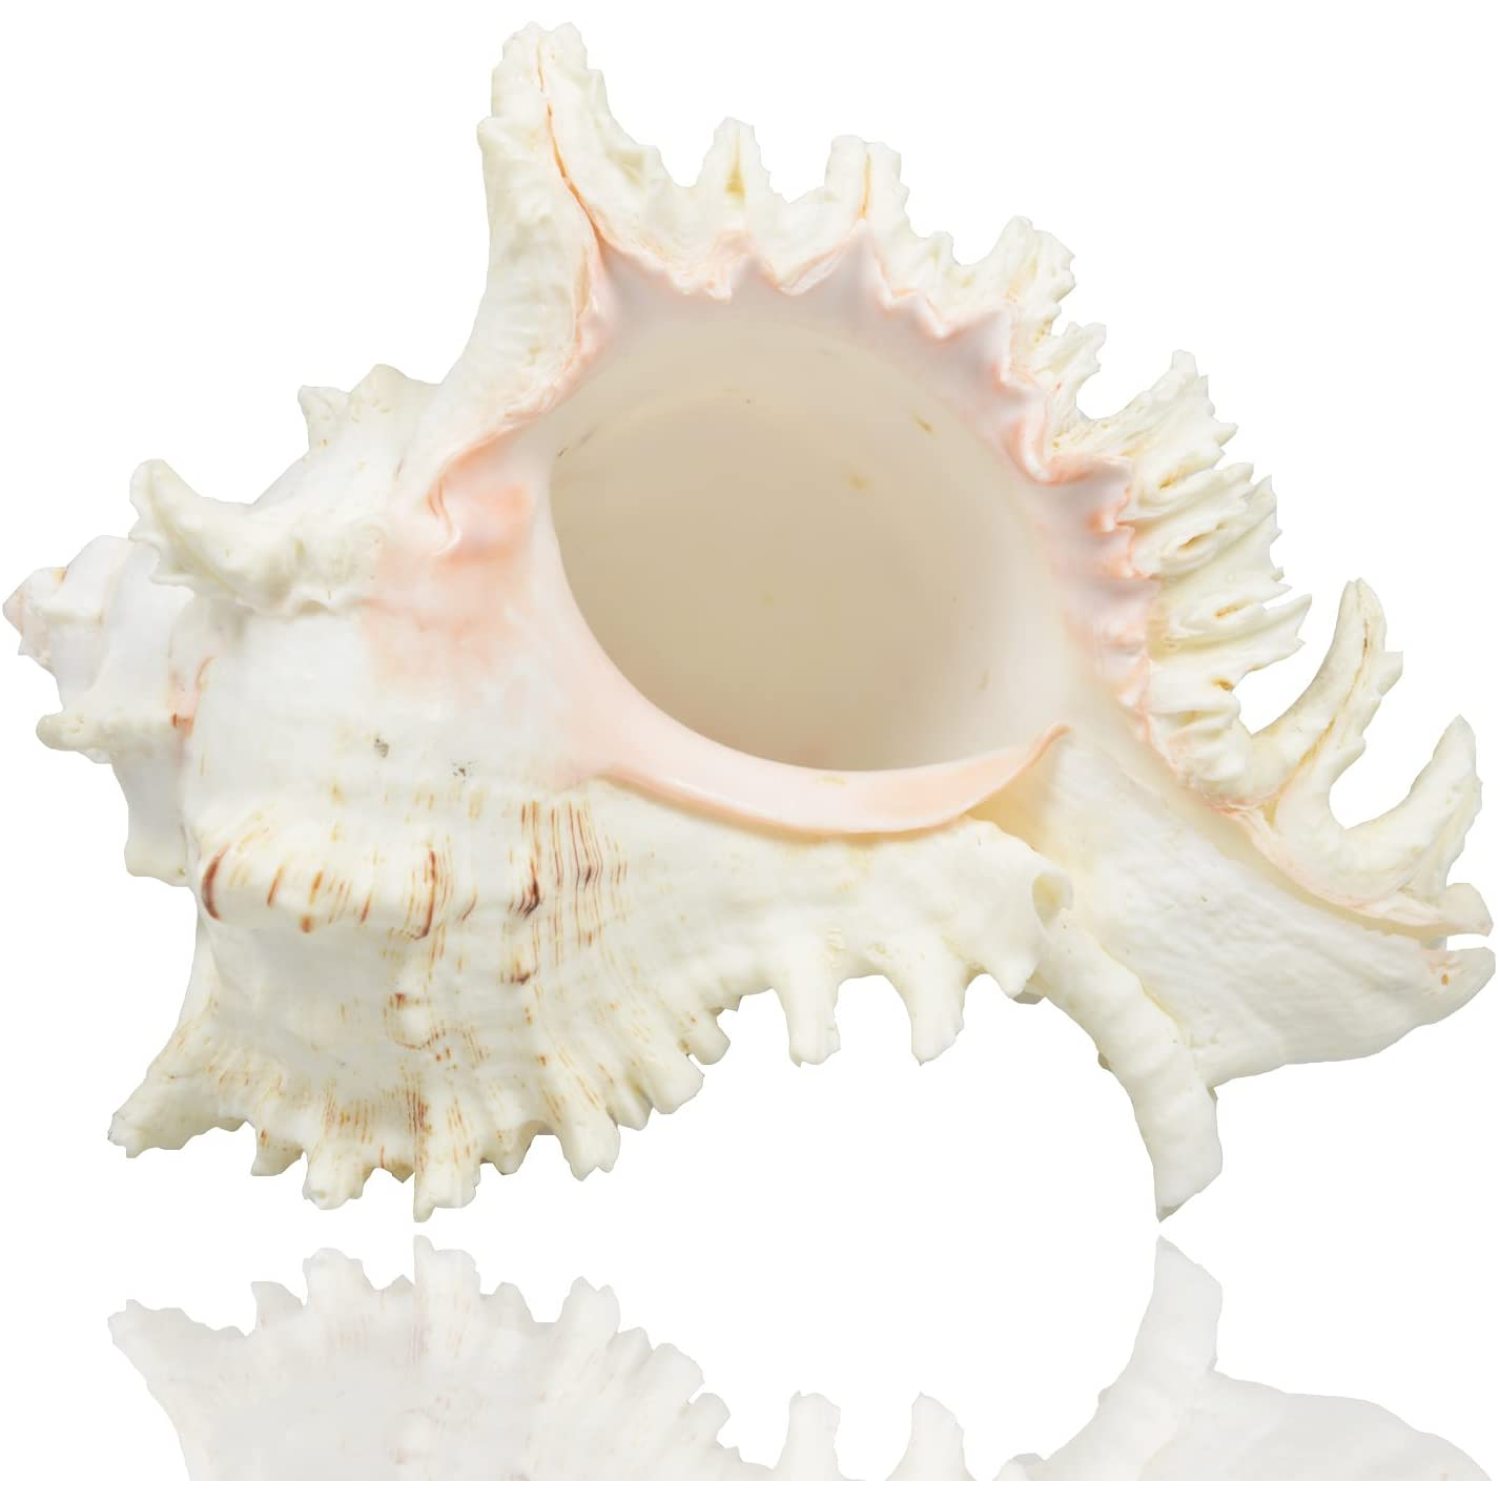 Large Natural Sea Shells, Huge Ocean Conch 7-8 Inches Jumbo Seashells  Perfect for Wedding Decor Beach Theme Party, Home Decorations,DIY Crafts,  Fish Tank and Shell Collectors 